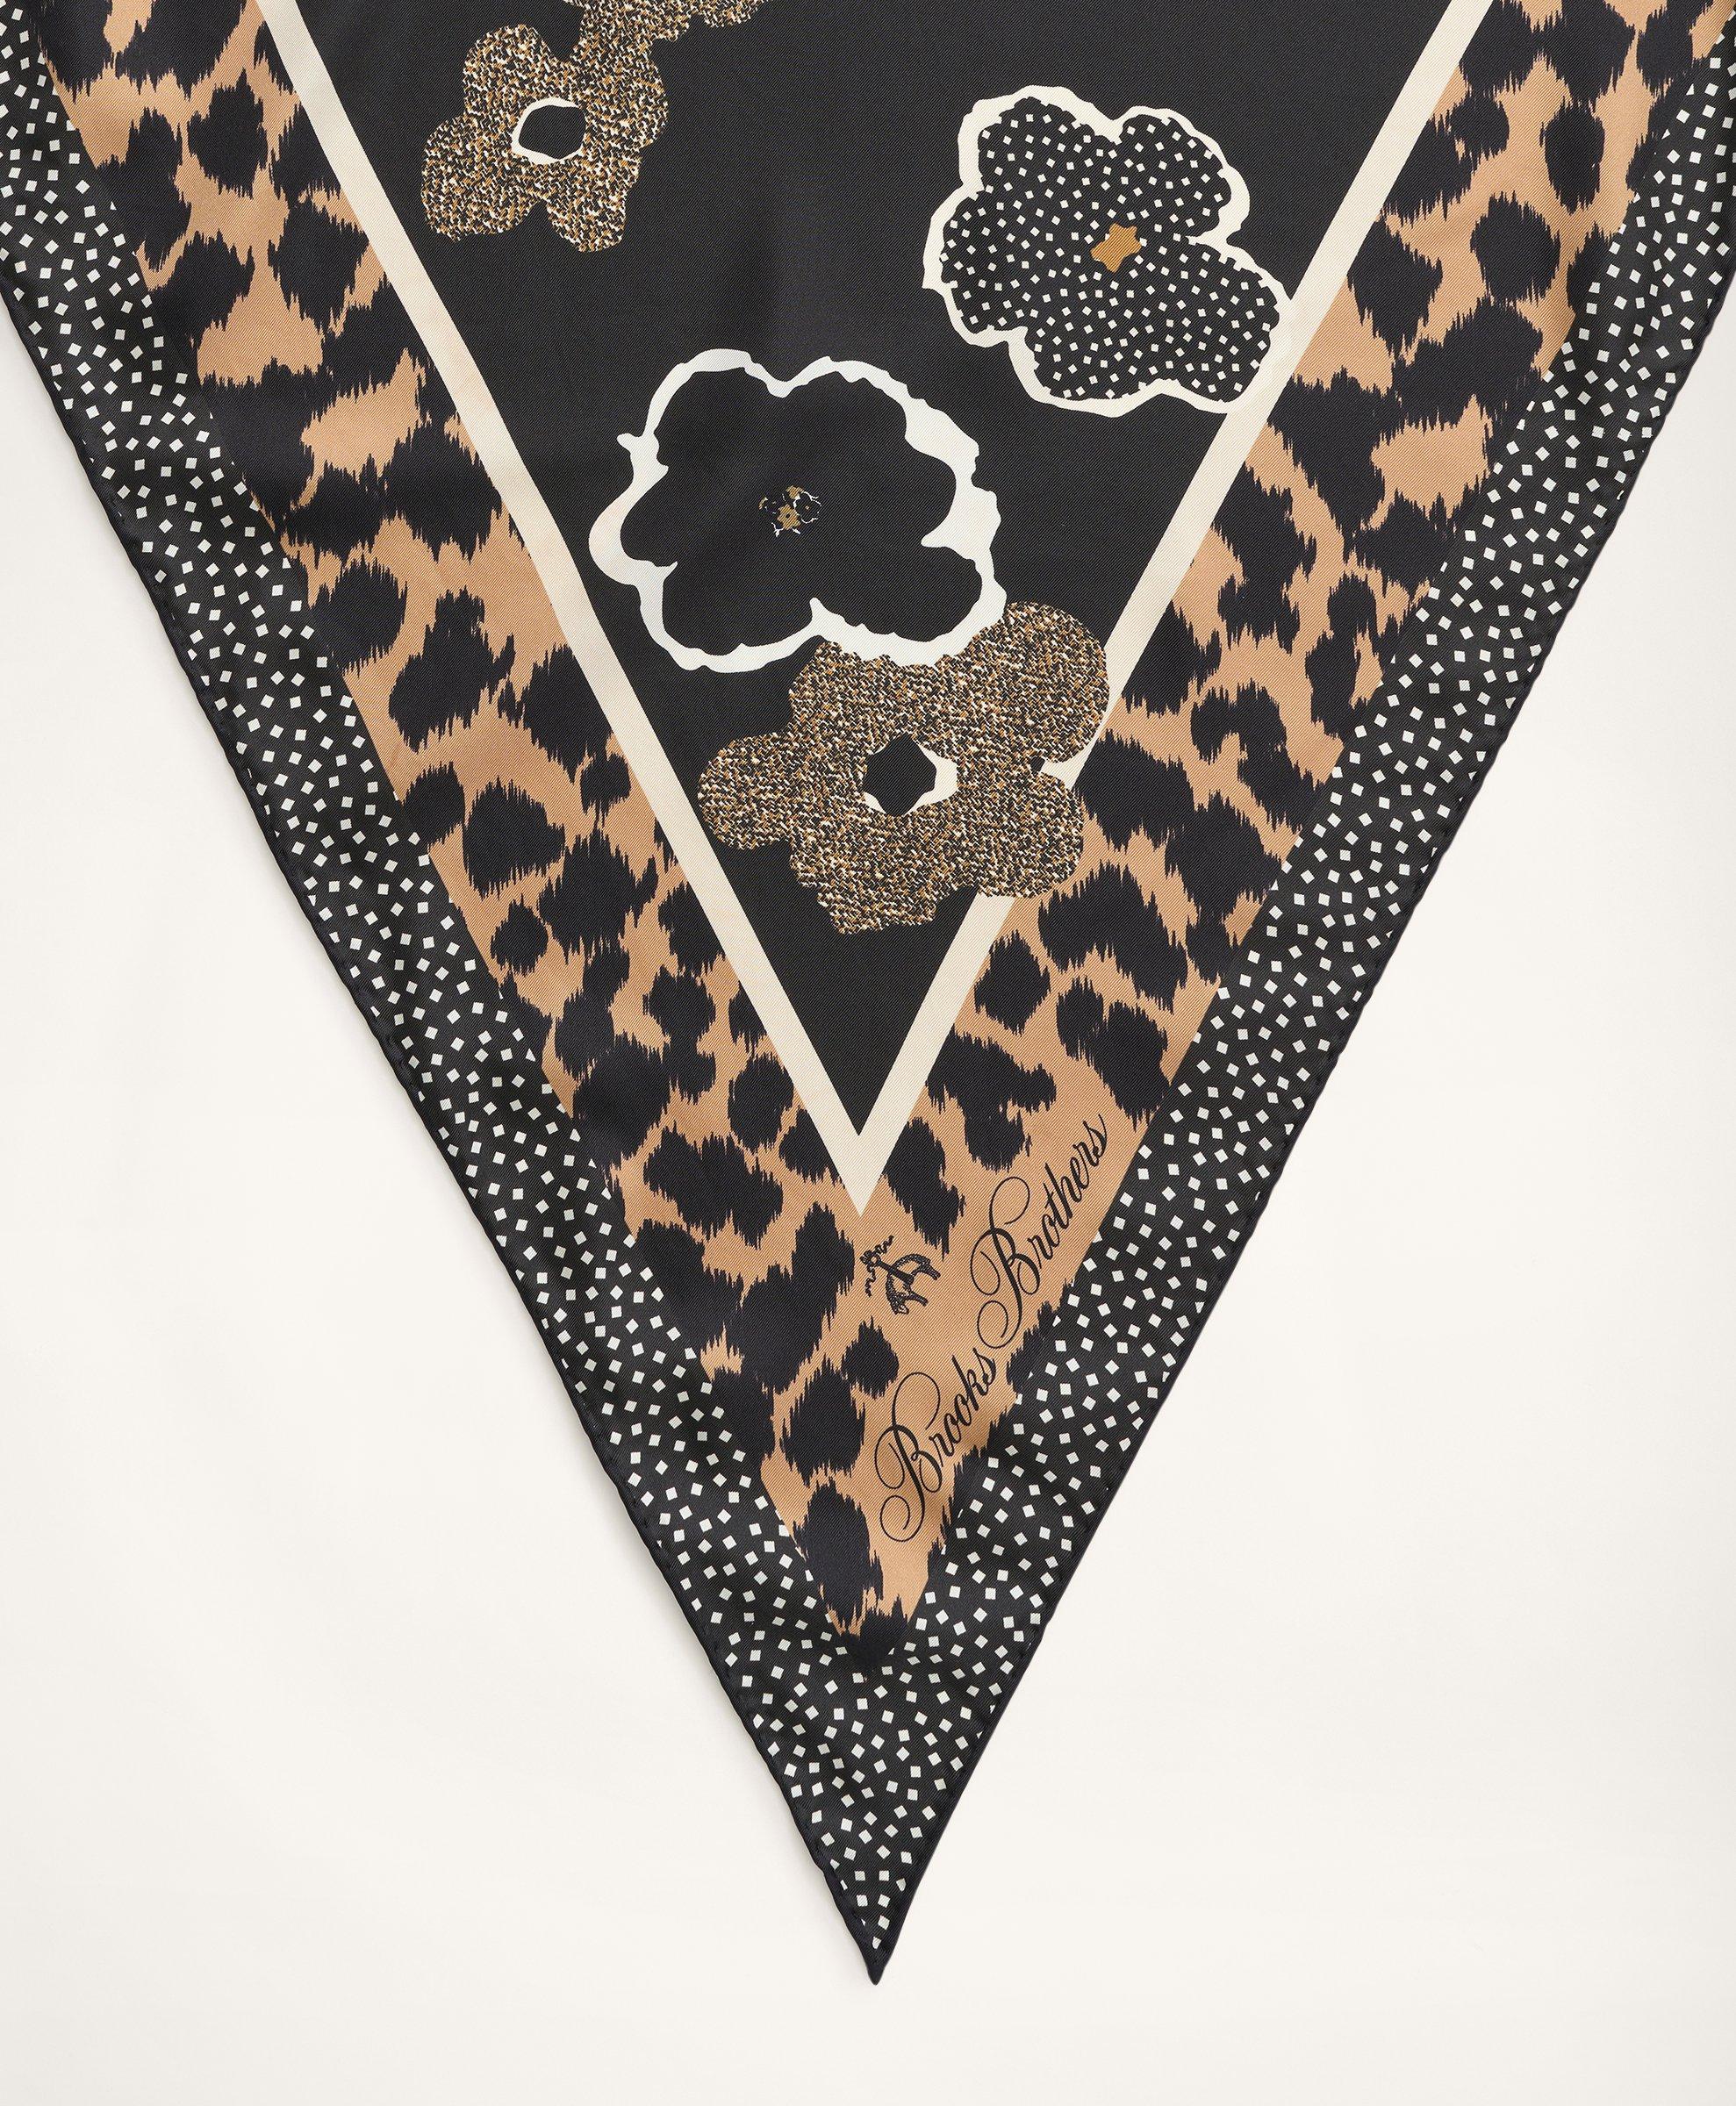 Brooks Brothers Women's Animal Print Scarf - Shop Holiday Gifts and Styles